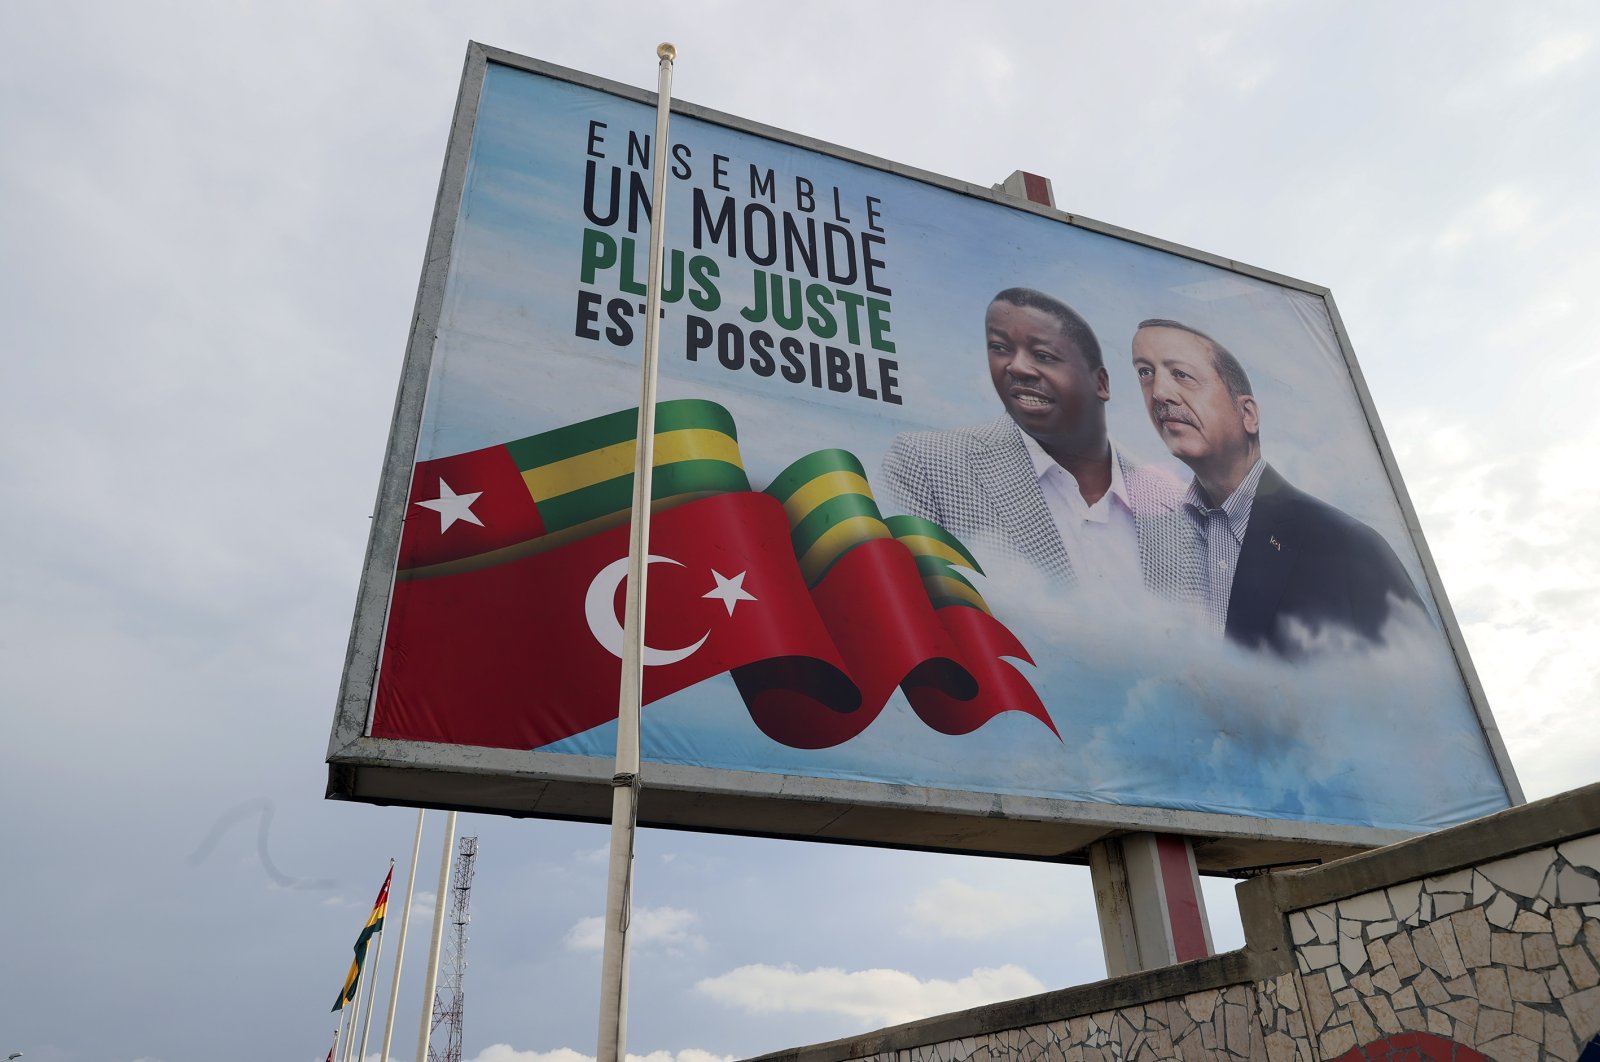 Posters of President Recep Tayyip Erdoğan and his Togolese counterpart Faure Gnassingbe with the words "Together a Fairer World is Possible" were seen in various parts of the capital Lome, Togo, Oct. 19, 2021. (AA Photo)